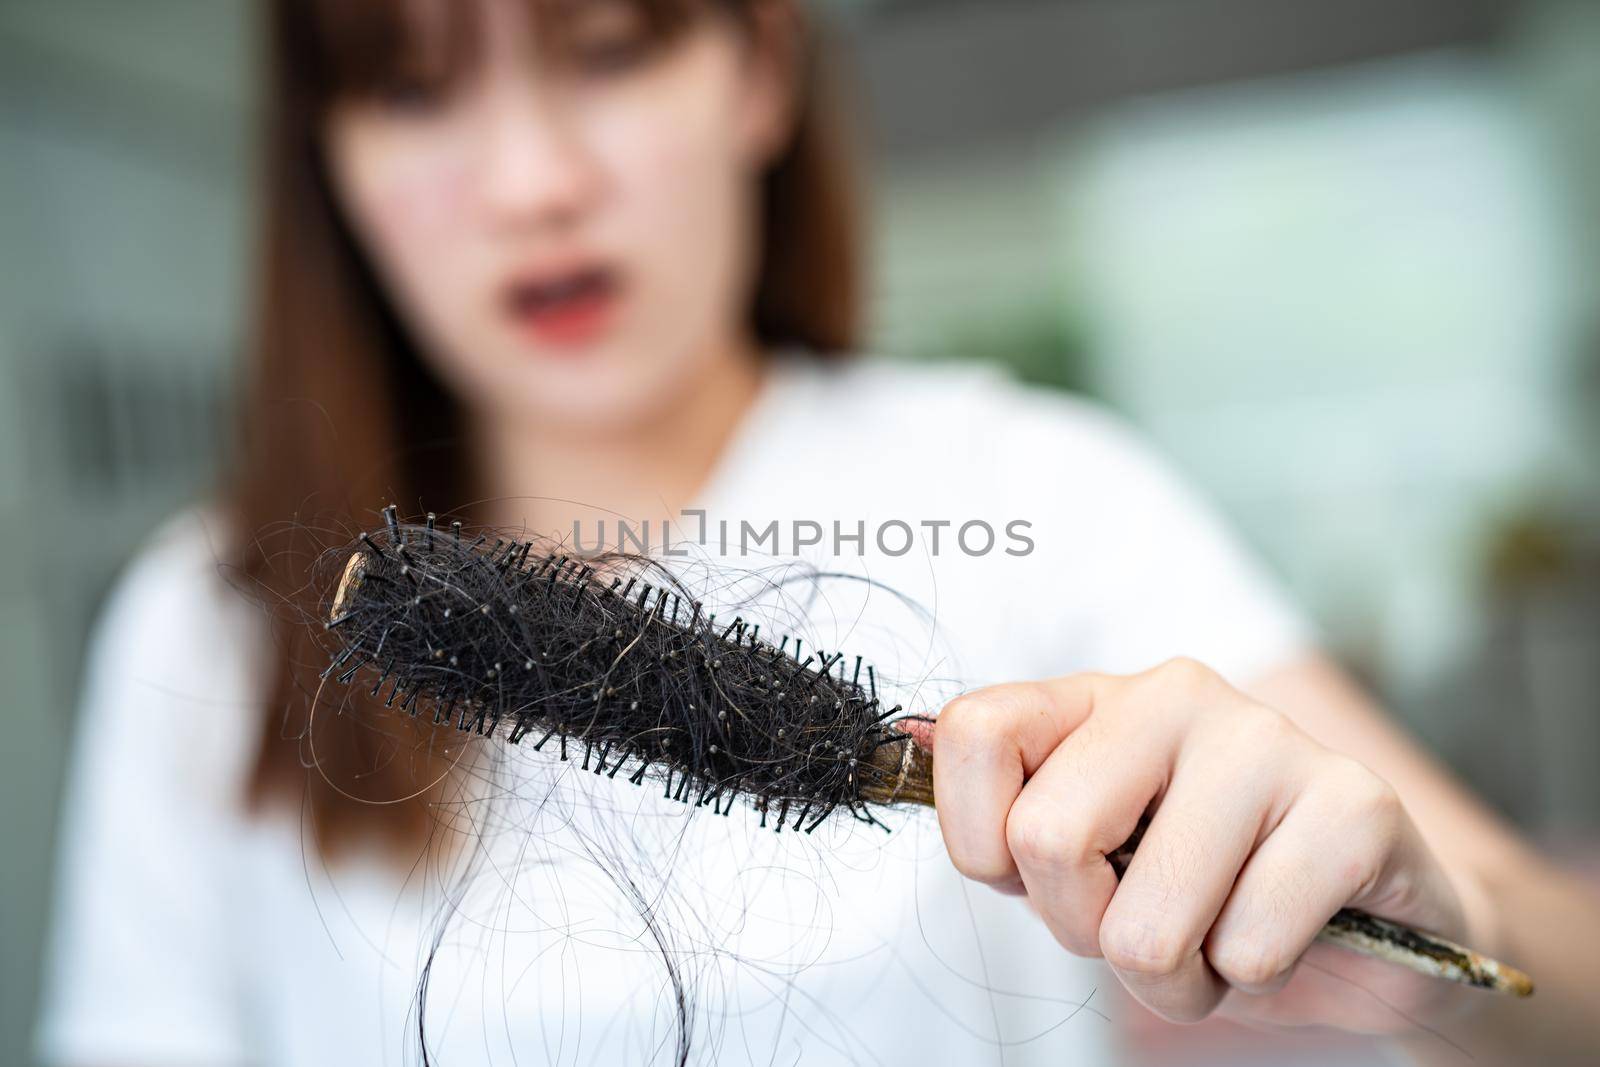 Asian woman have problem with long hair loss attach to comb brush.